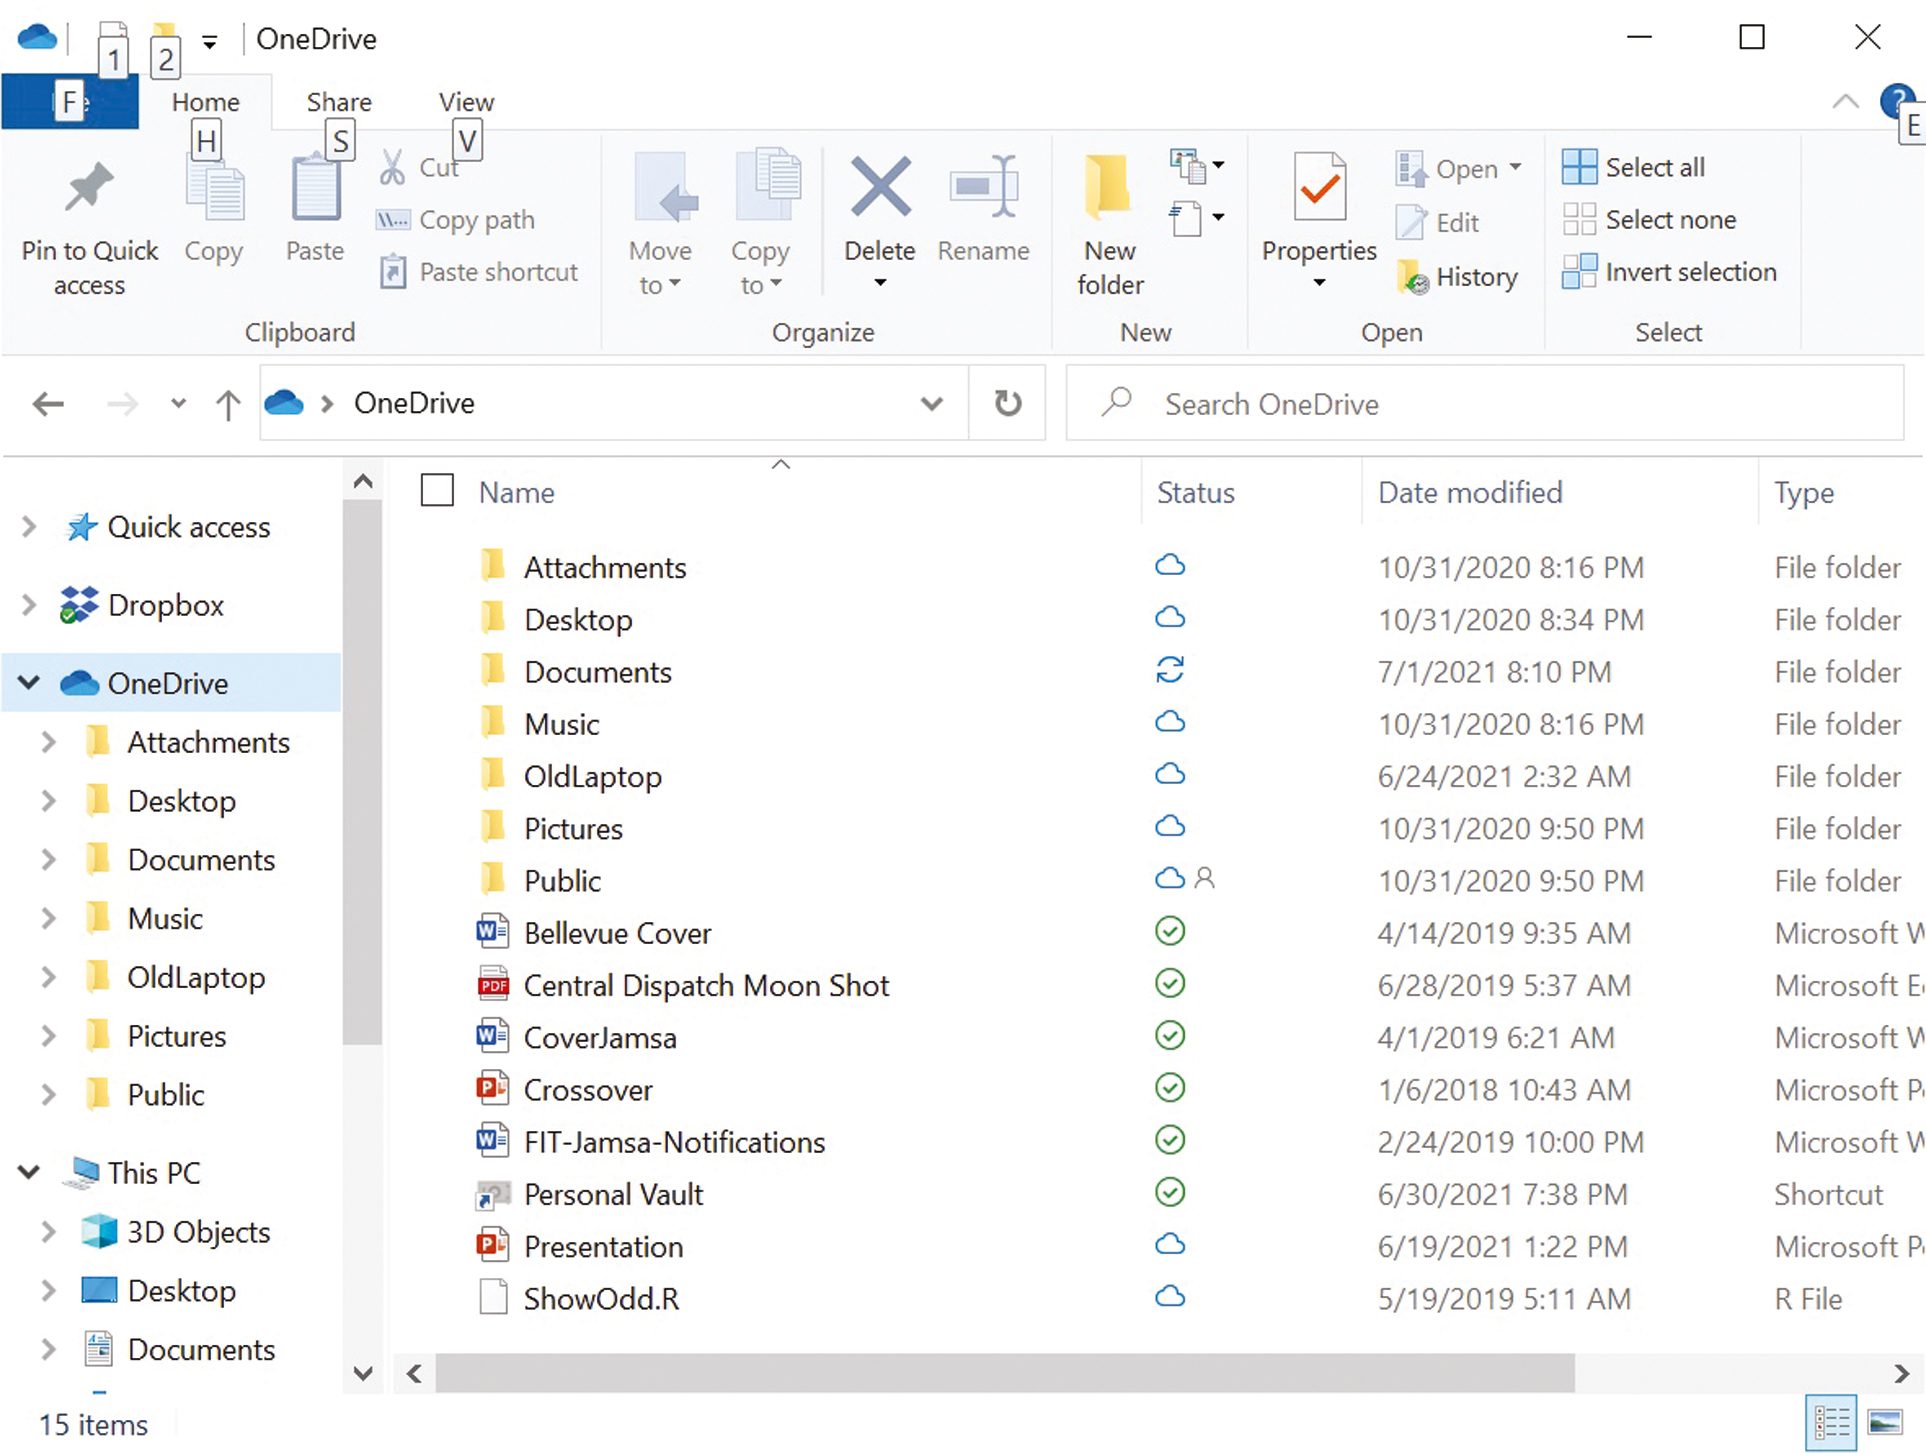 The screenshot at the top shows OneDrive in Windows Explorer. In the navigation pane on the left, OneDrive is selected. The files and folders of OneDrive are listed in the right pane. Home, Share, and View are the menus at the top in which Home menu is selected. The screenshot at the bottom shows Word Save As dialog box. In the navigation pane on the left, OneDrive is selected. The files and folders of OneDrive are listed in the right pane. File name drop drown box is filled as chapter 06 new. Save as type drop down box is selected as Word Document. Save button at bottom right of the dialog box is selected.
